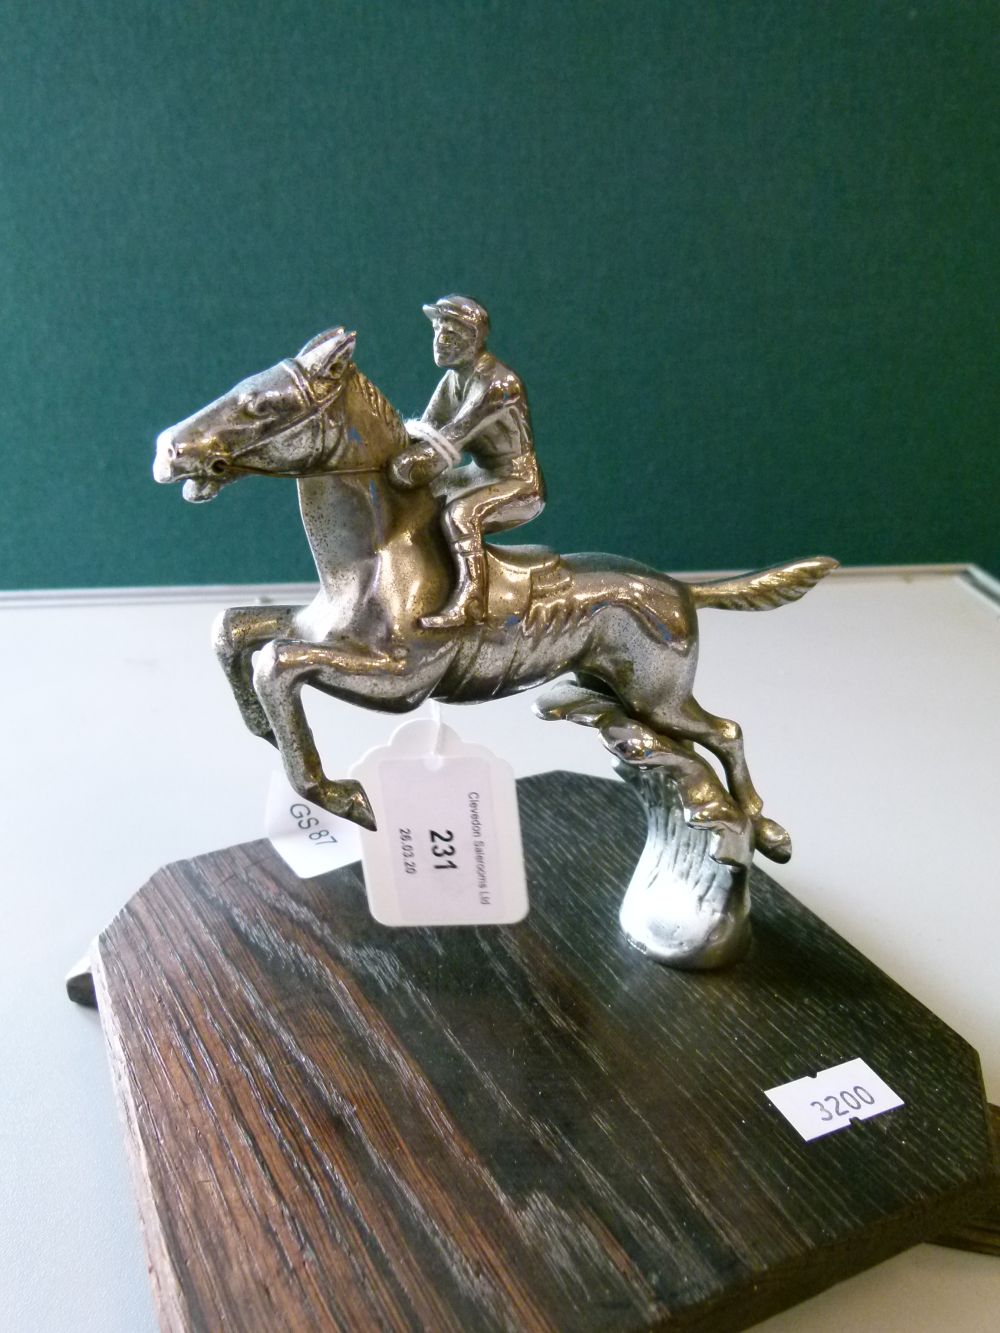 1930's chrome horse and jockey car mascot, attributed to Desmo, on wooden mount - Image 2 of 4